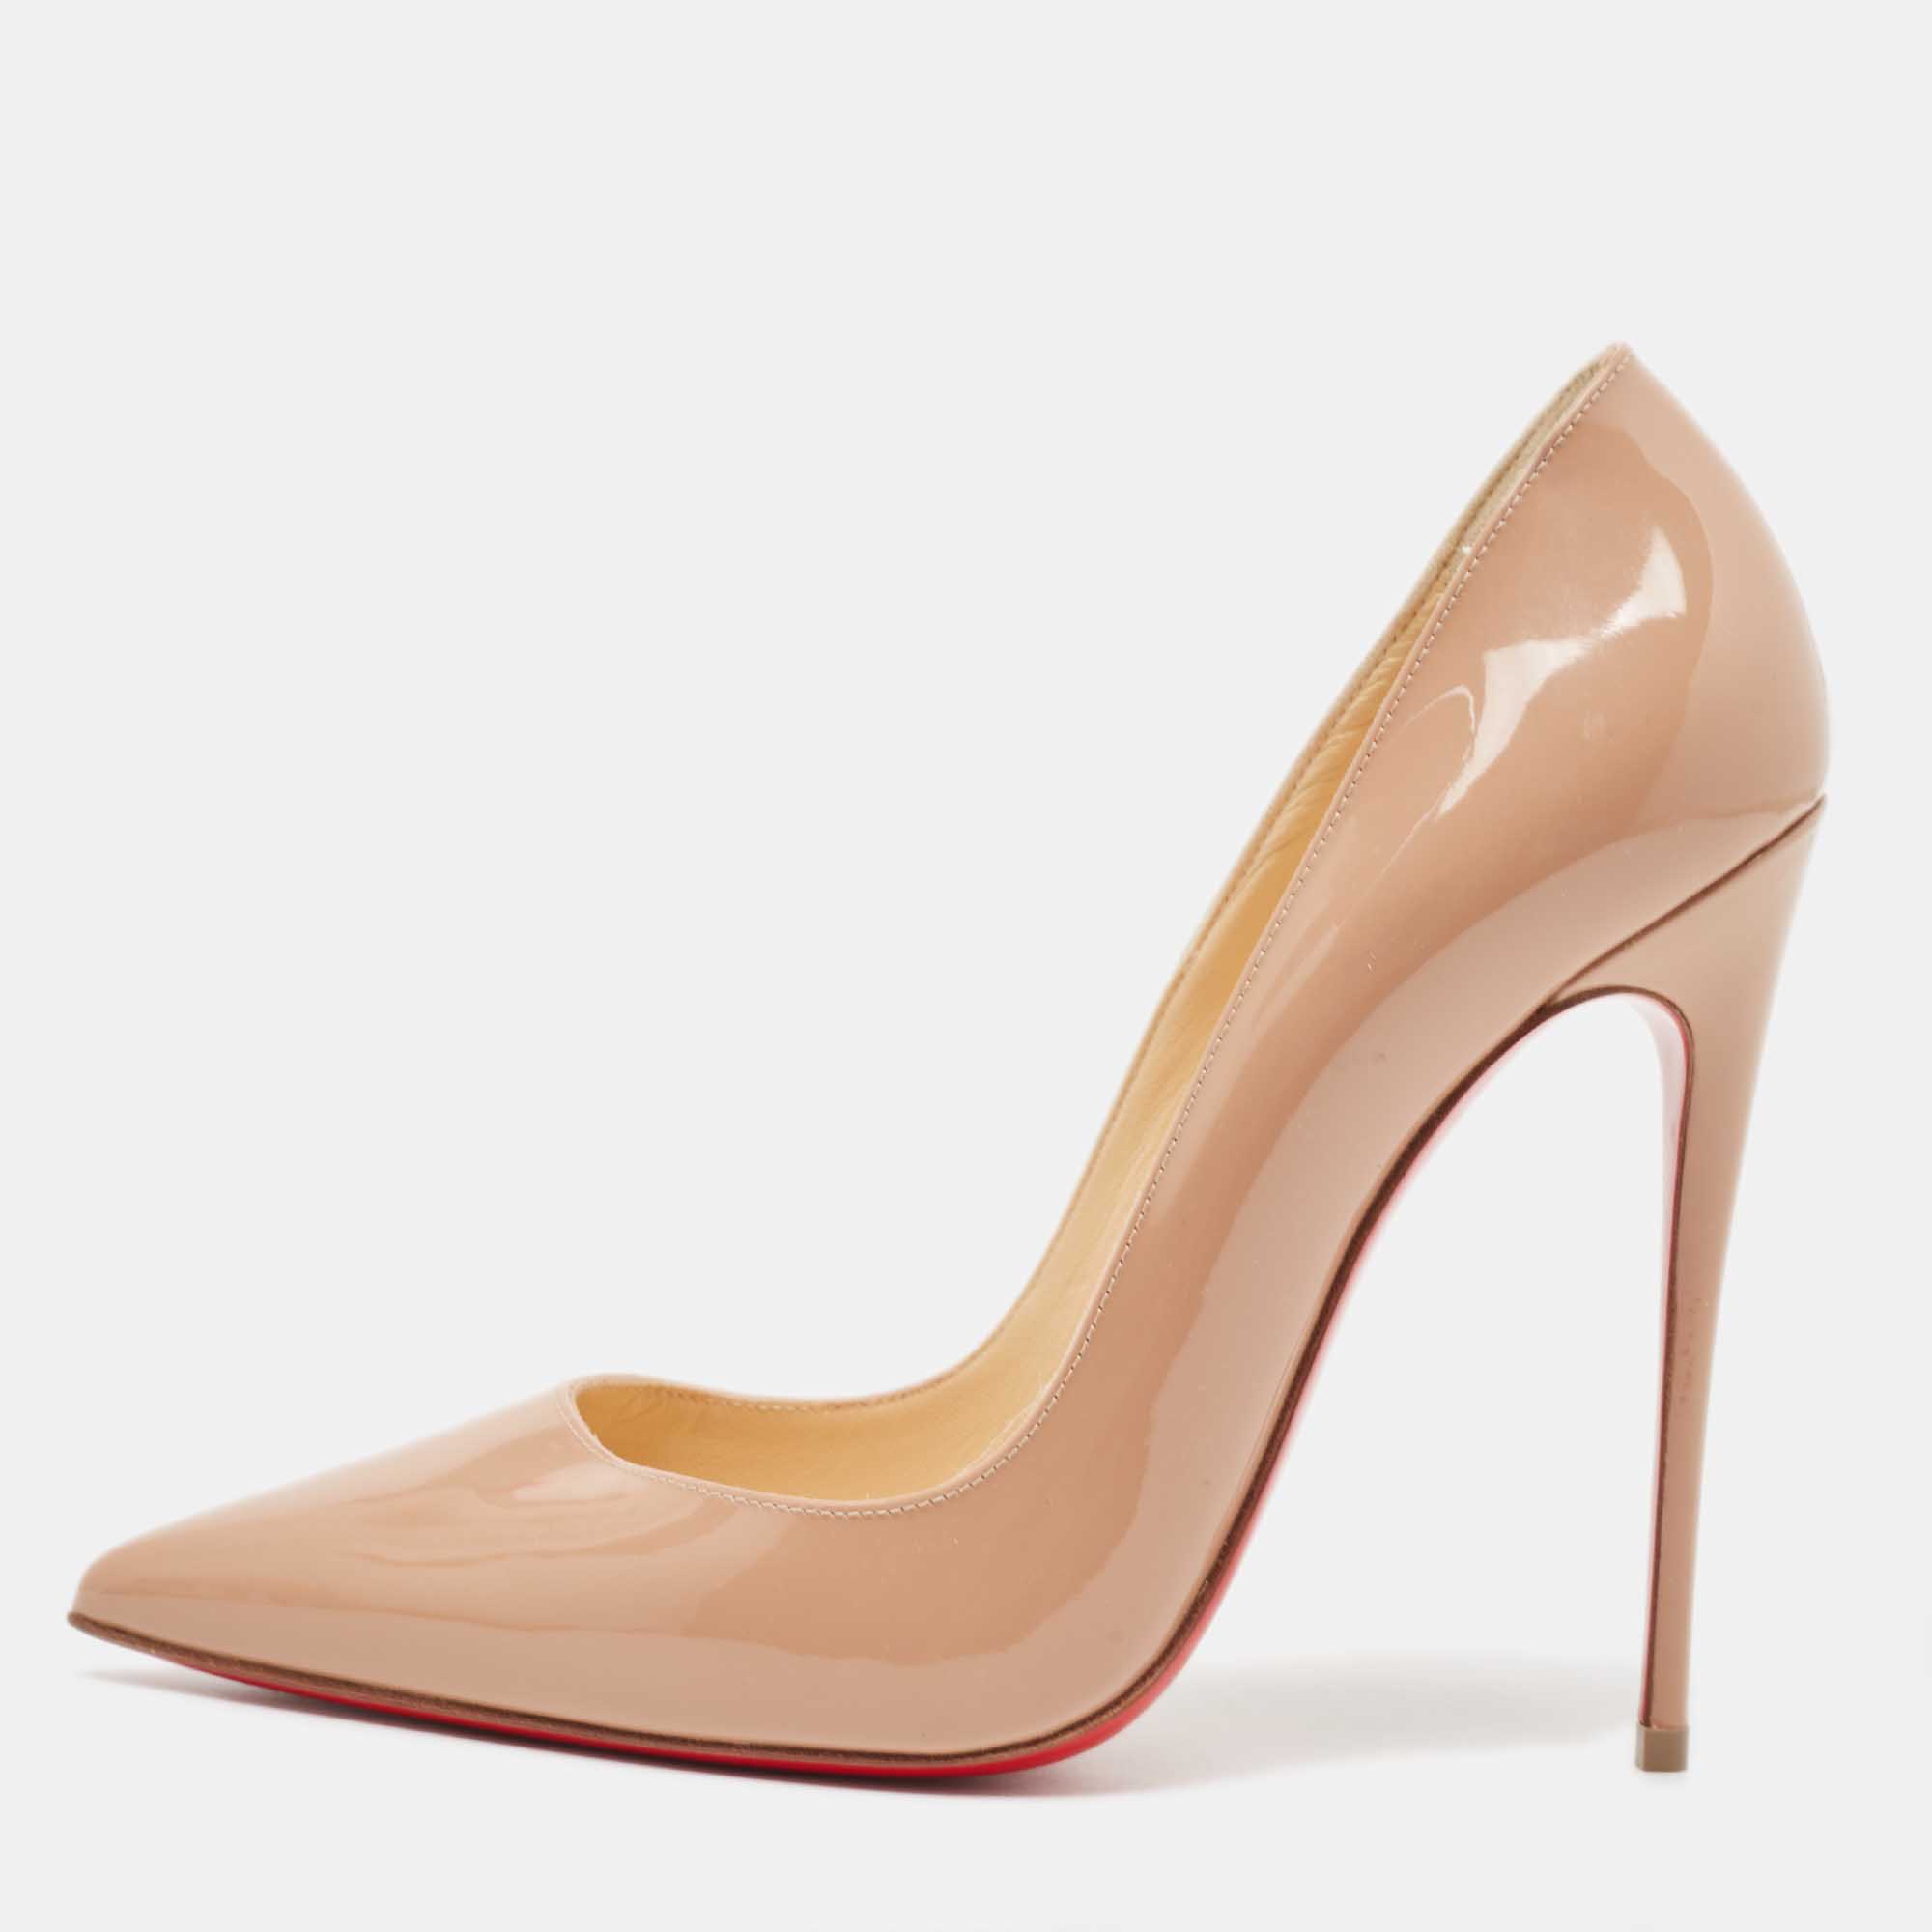 

Christian Louboutin Beige Patent Leather So Kate Pumps Size